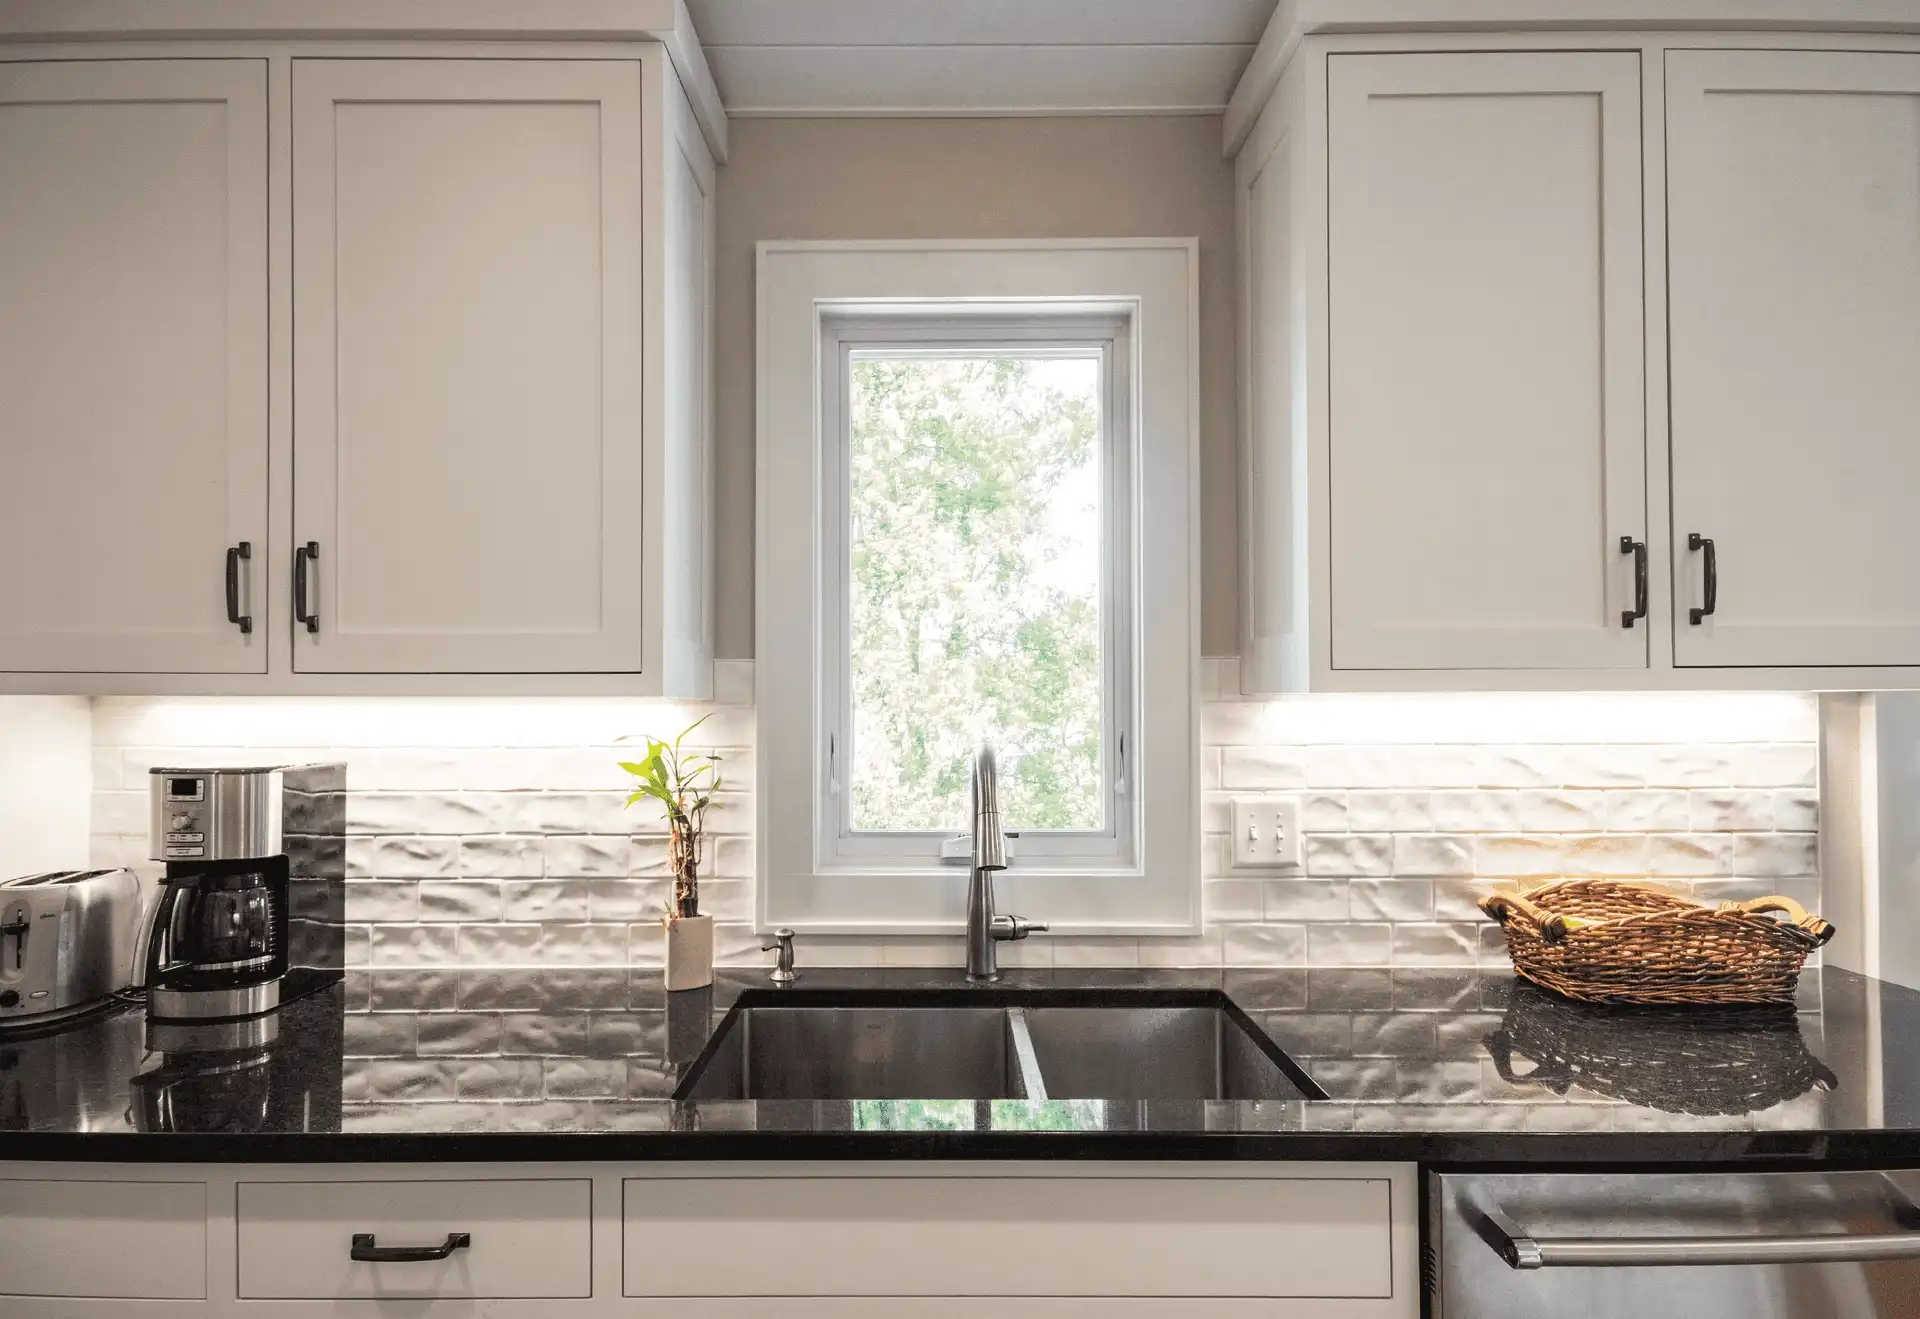 Interior kitchen image featuring an Awning window in Stone White interior finish.